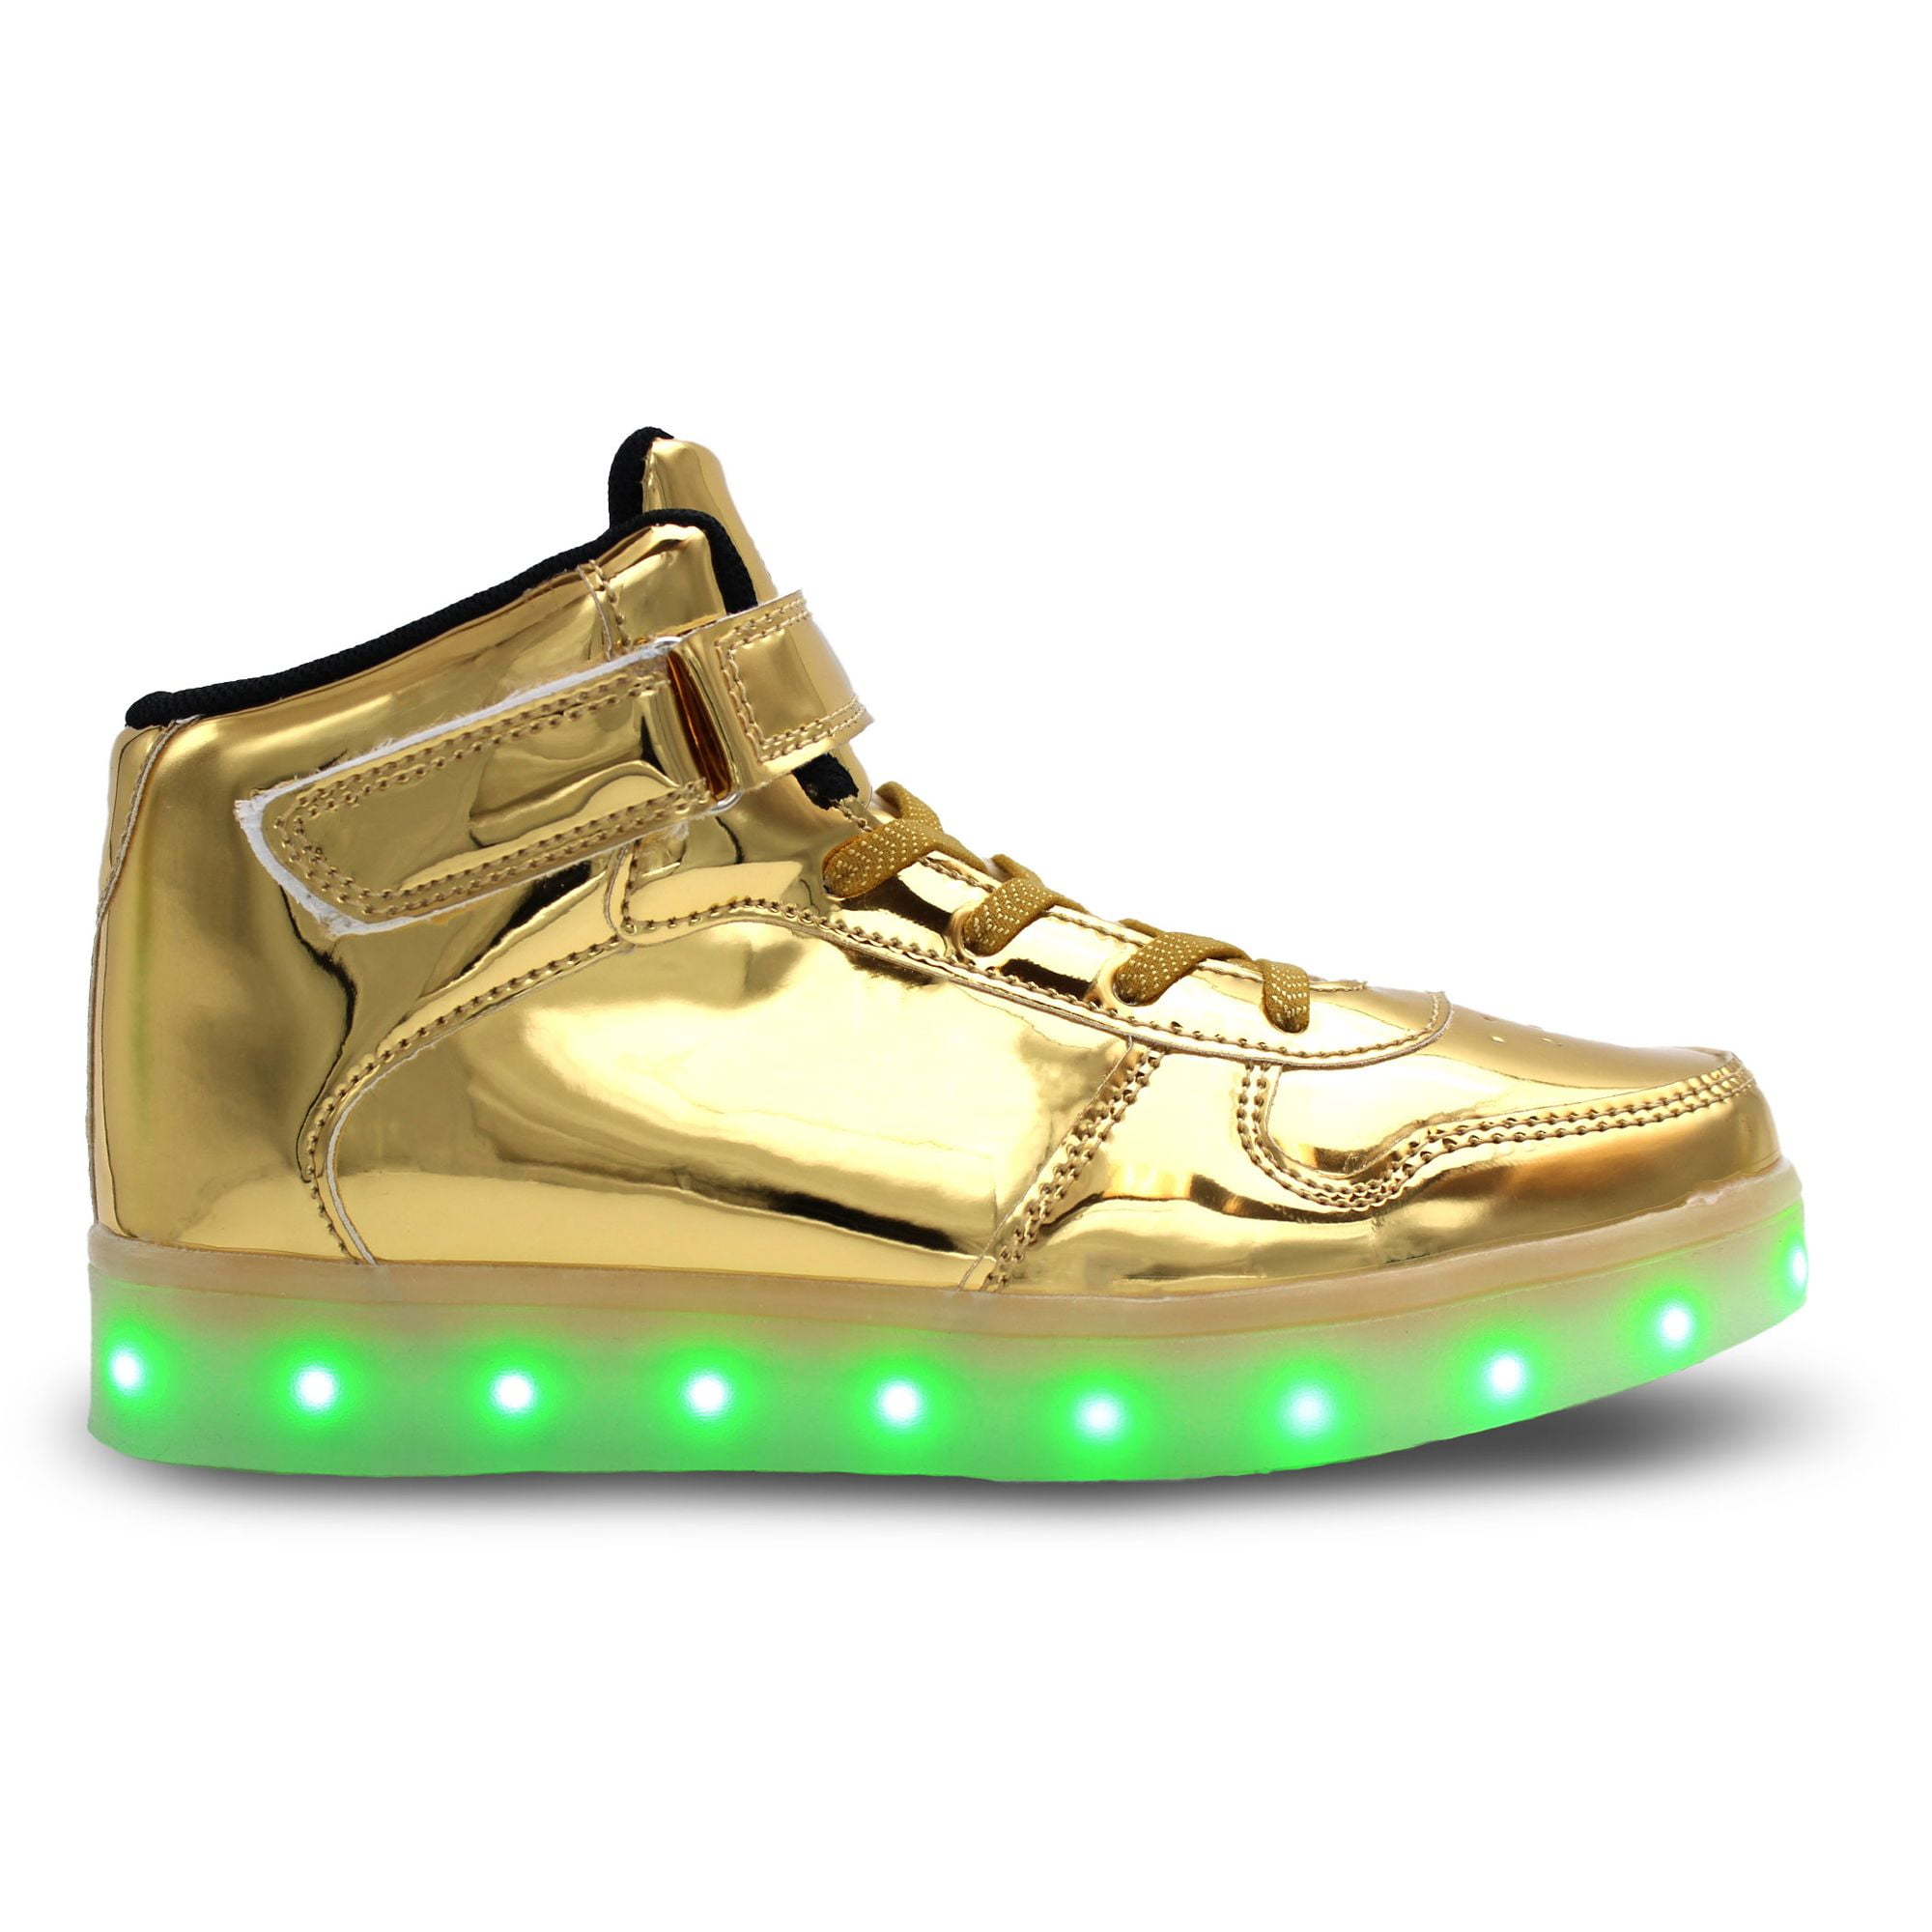 Odema Girls Boys Light Up Hightop LED Sneakers Ankle Boots Gold Size US10 Toddler